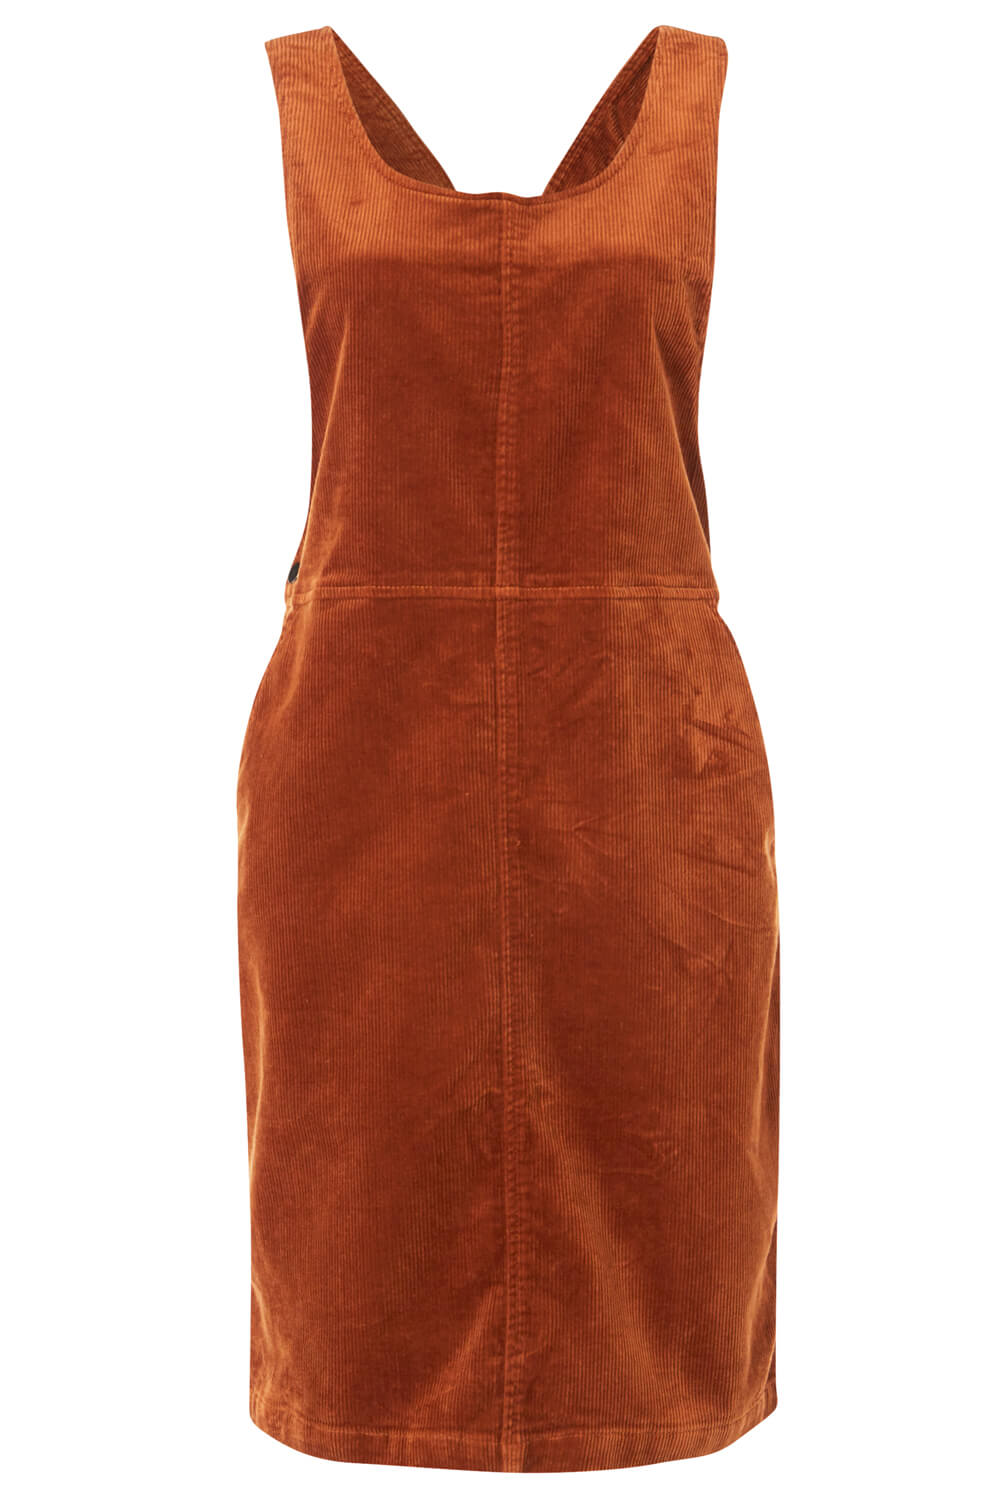 Rust Button Corduroy Pinafore Dress, Image 5 of 5